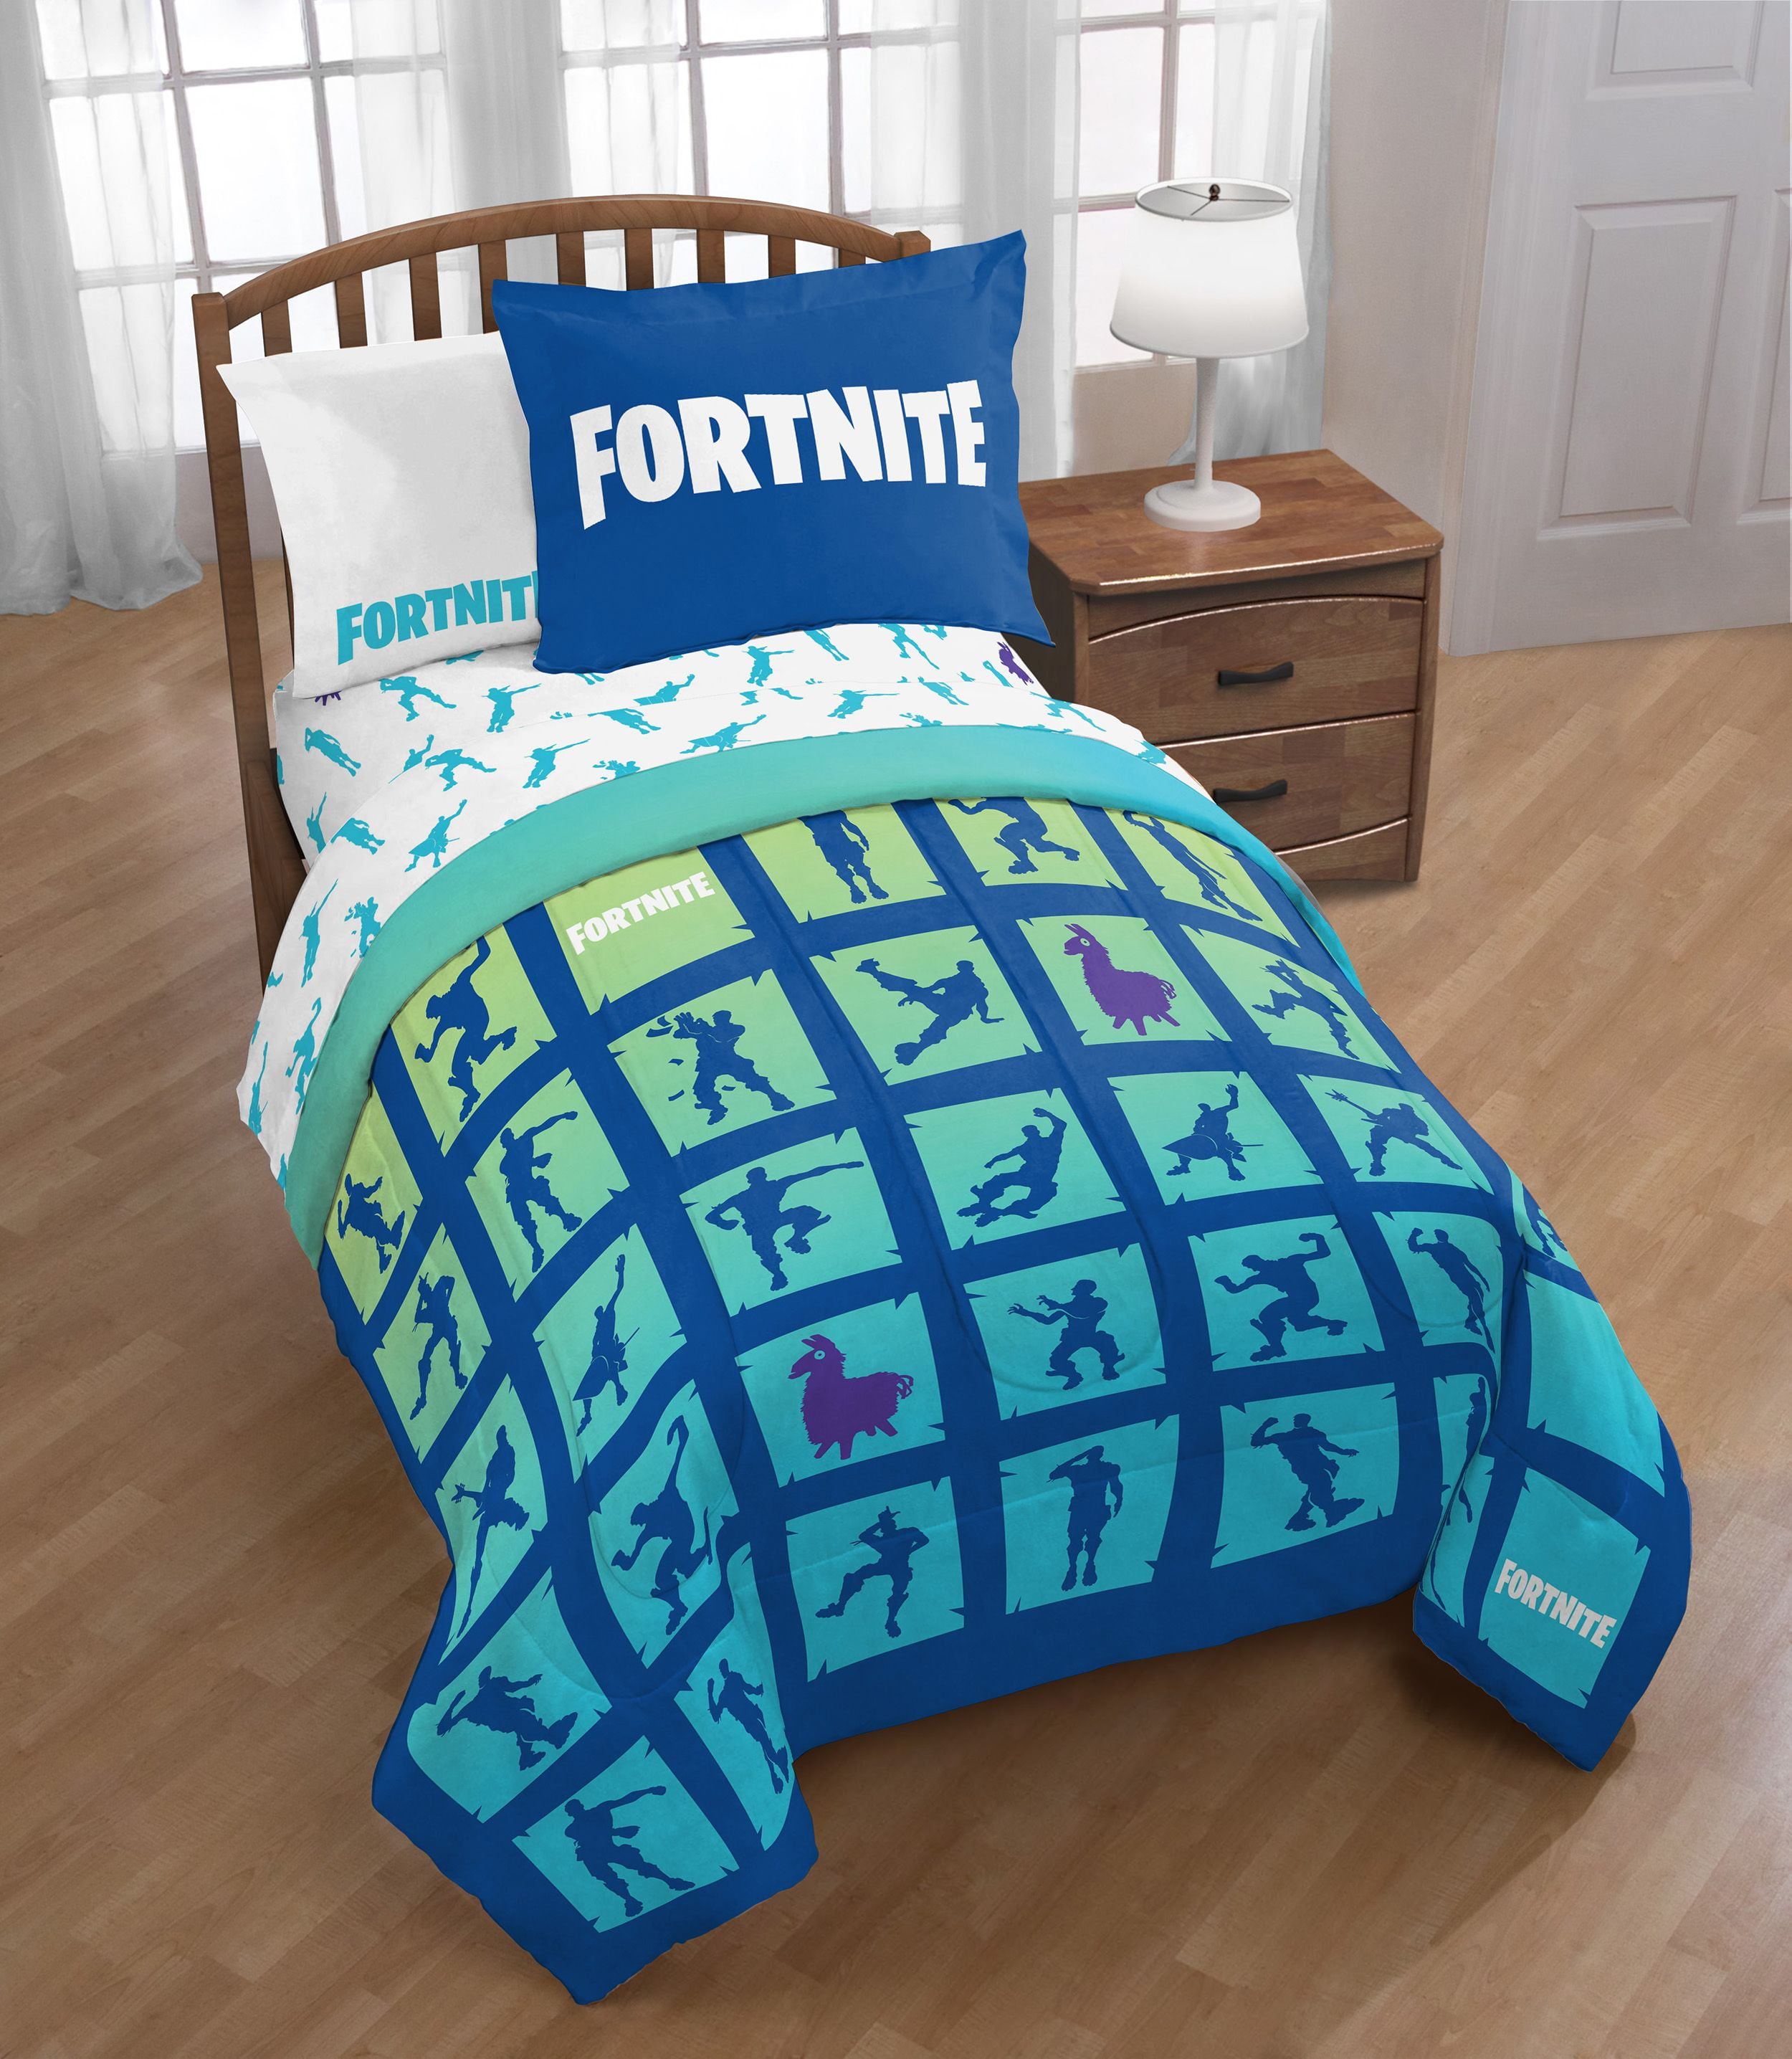 New Fortnite Twin Size Comforter Set Bed in a Bag Sheets Bedding Kid's Bedspread 